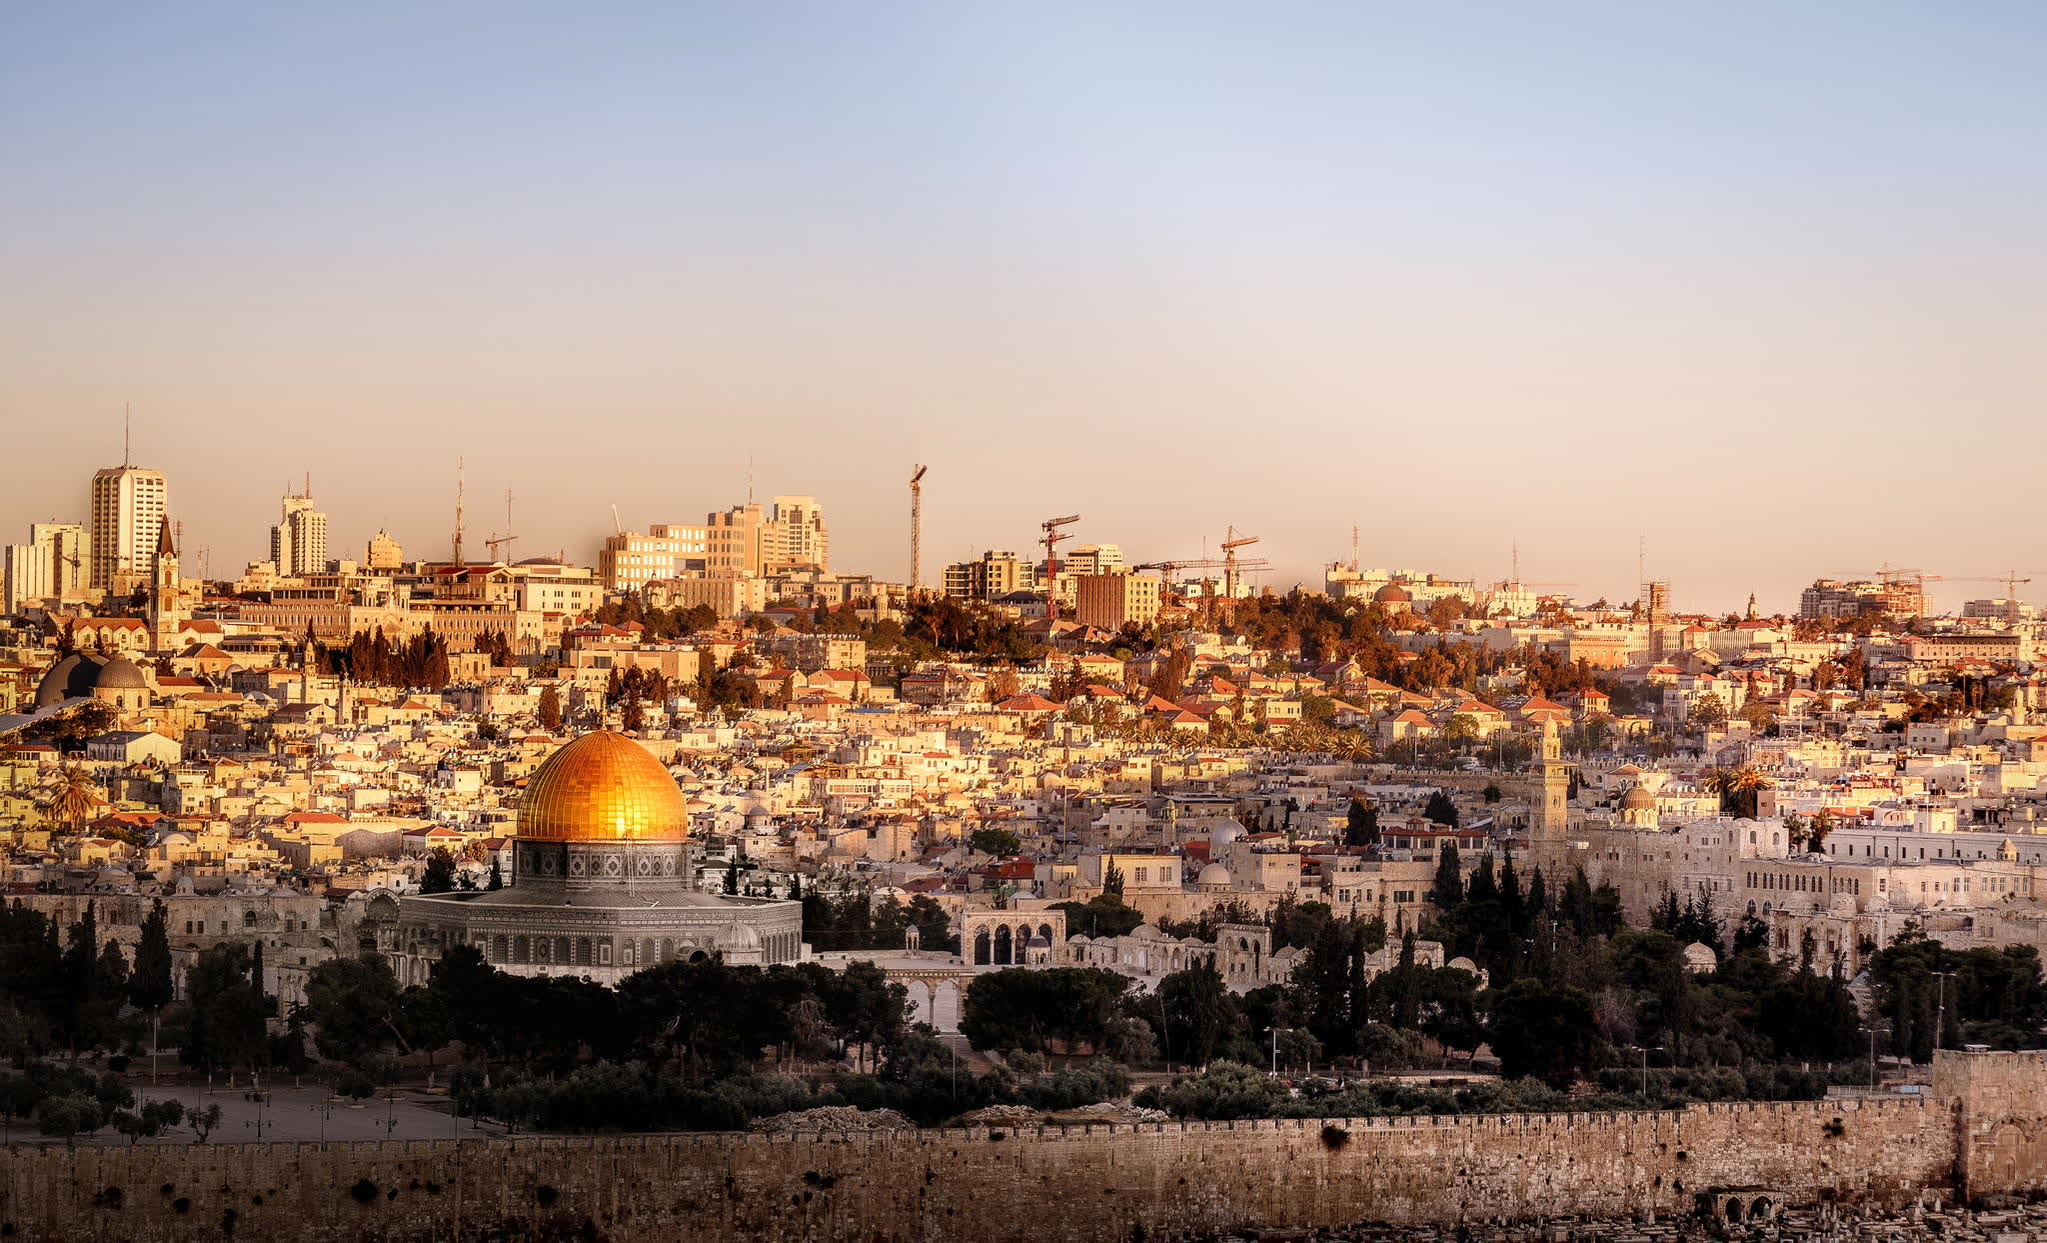 The status of Jerusalem remains a crucial issue in the ongoing Israel-Palestinian conflict (Stefano Rocca / EyeEm—Getty Images/EyeEm)